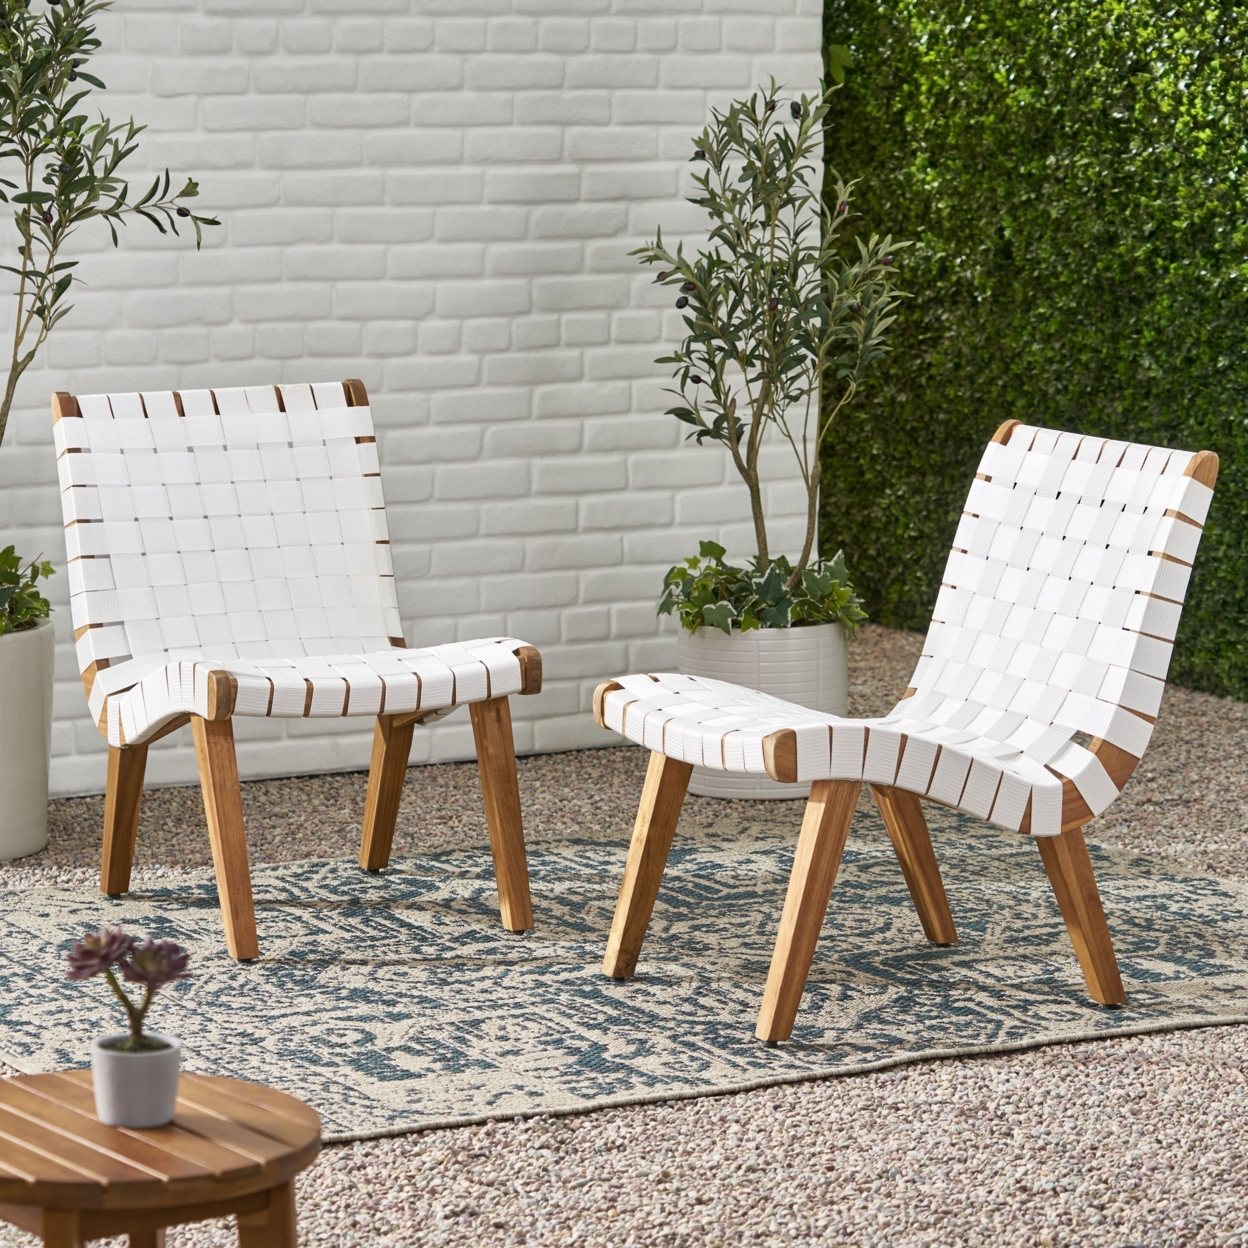 Ocilla Outdoor Rope Weave Lounge Chair, Set Of 2 - White/teak